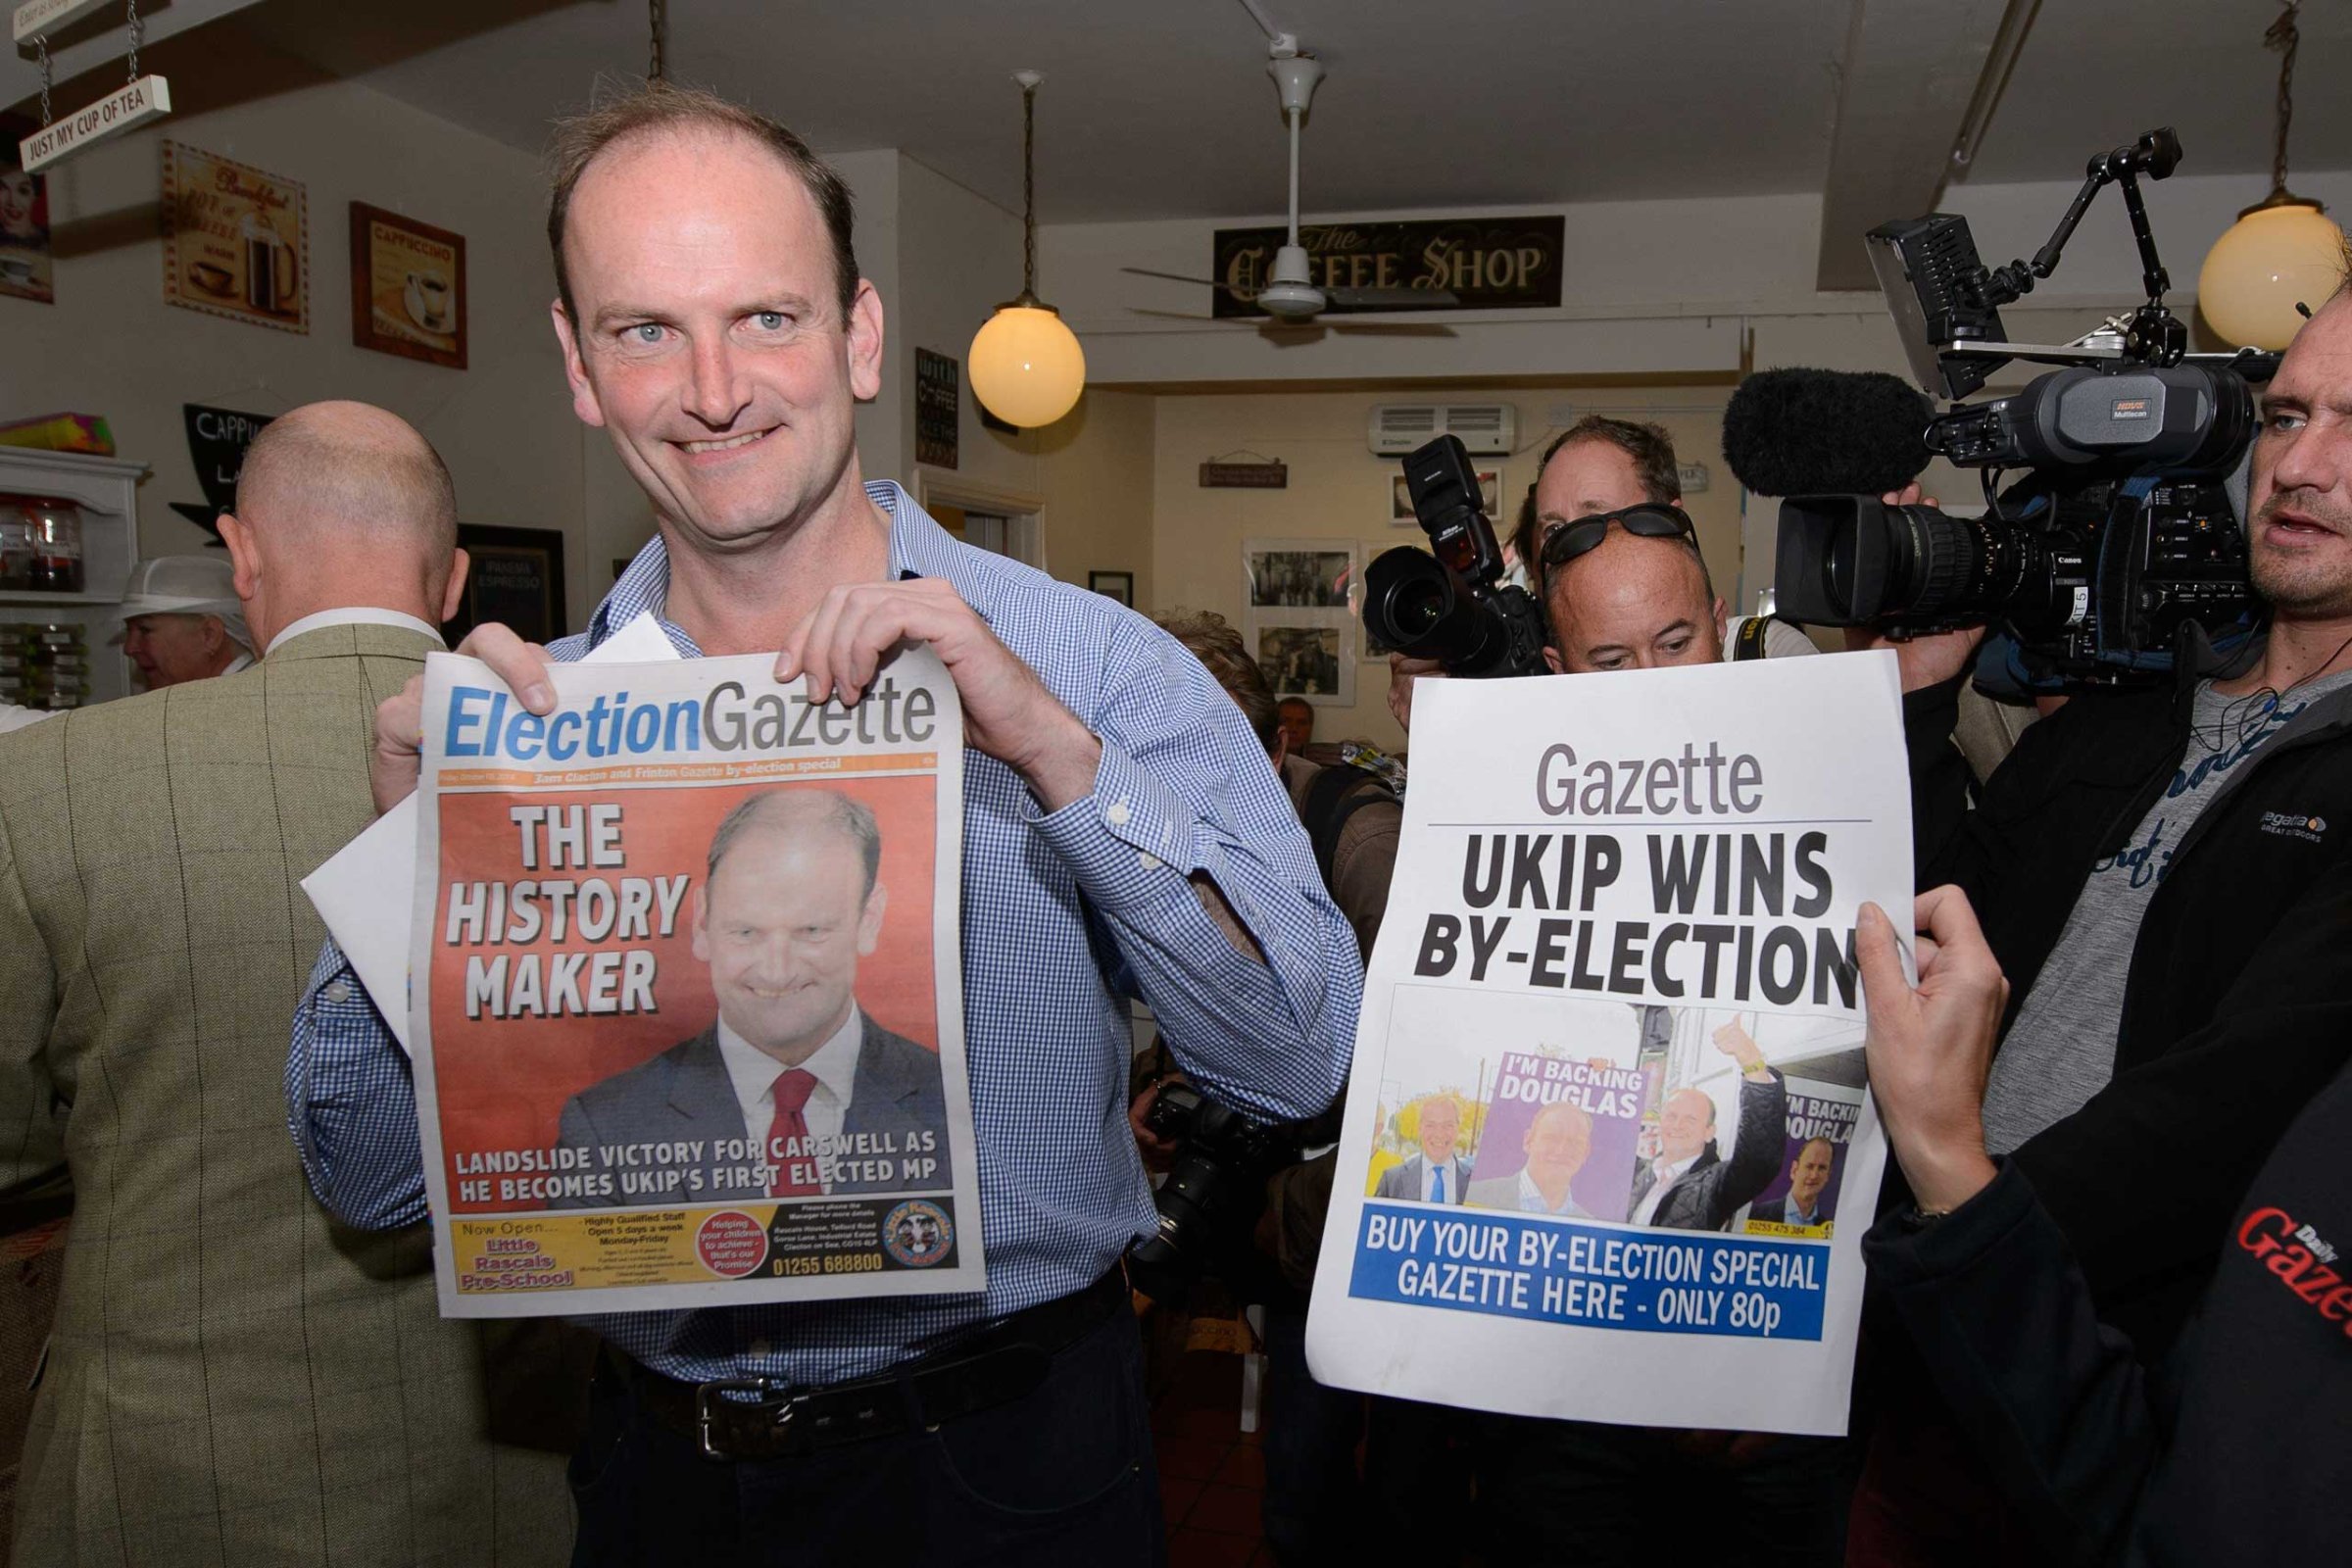 Newly-elected UK Independence Party MP Douglas Carswell poses for photographers with a copy of the local paper in Clacton-on-Sea, in eastern England, on Oct. 10, 2014.